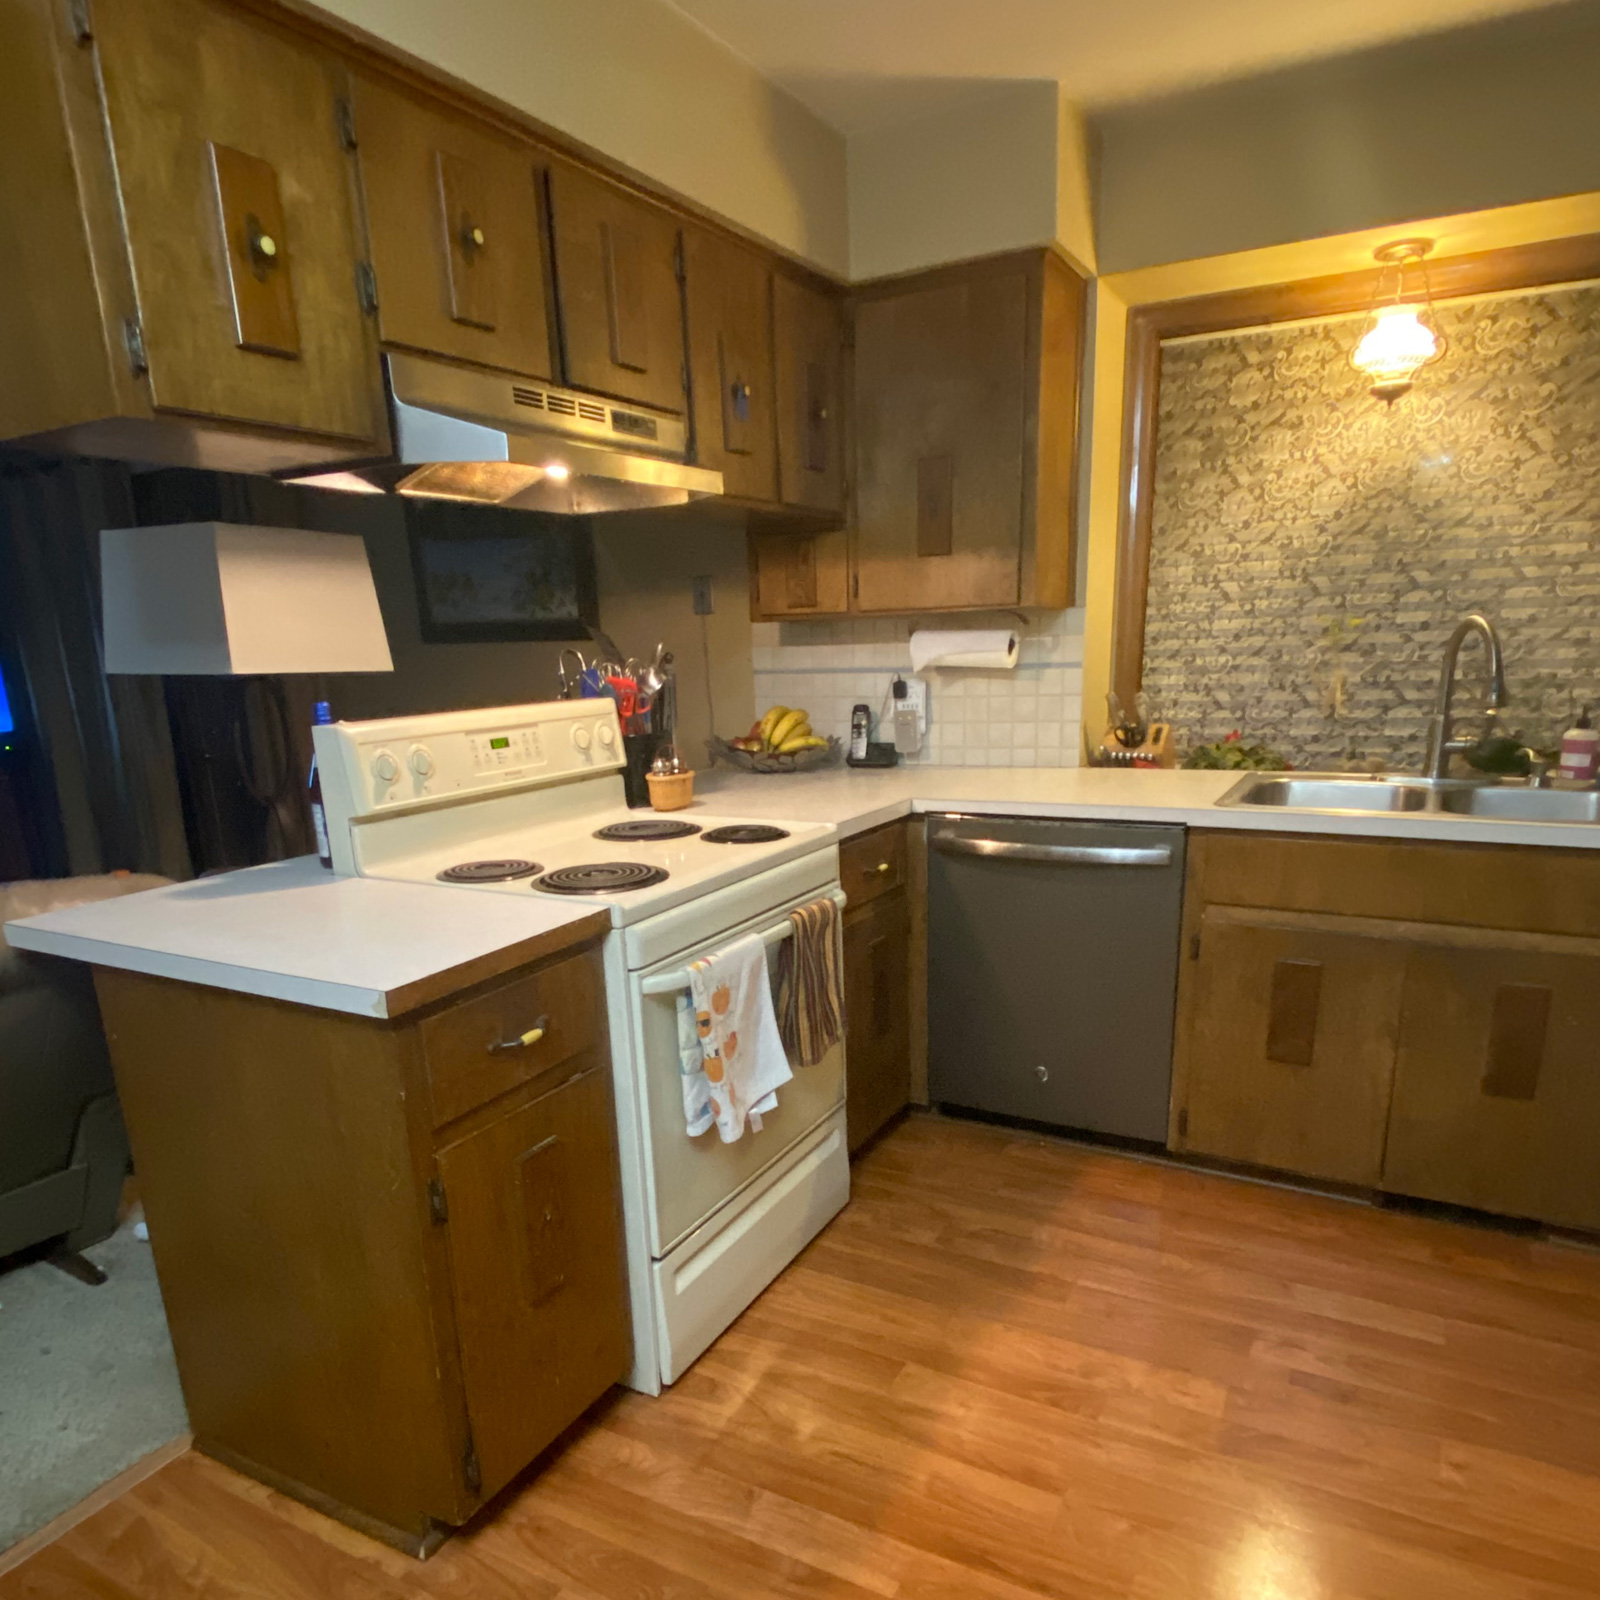 Entry 92 - Outdated cabinetry & hardware makes for a tired kitchen